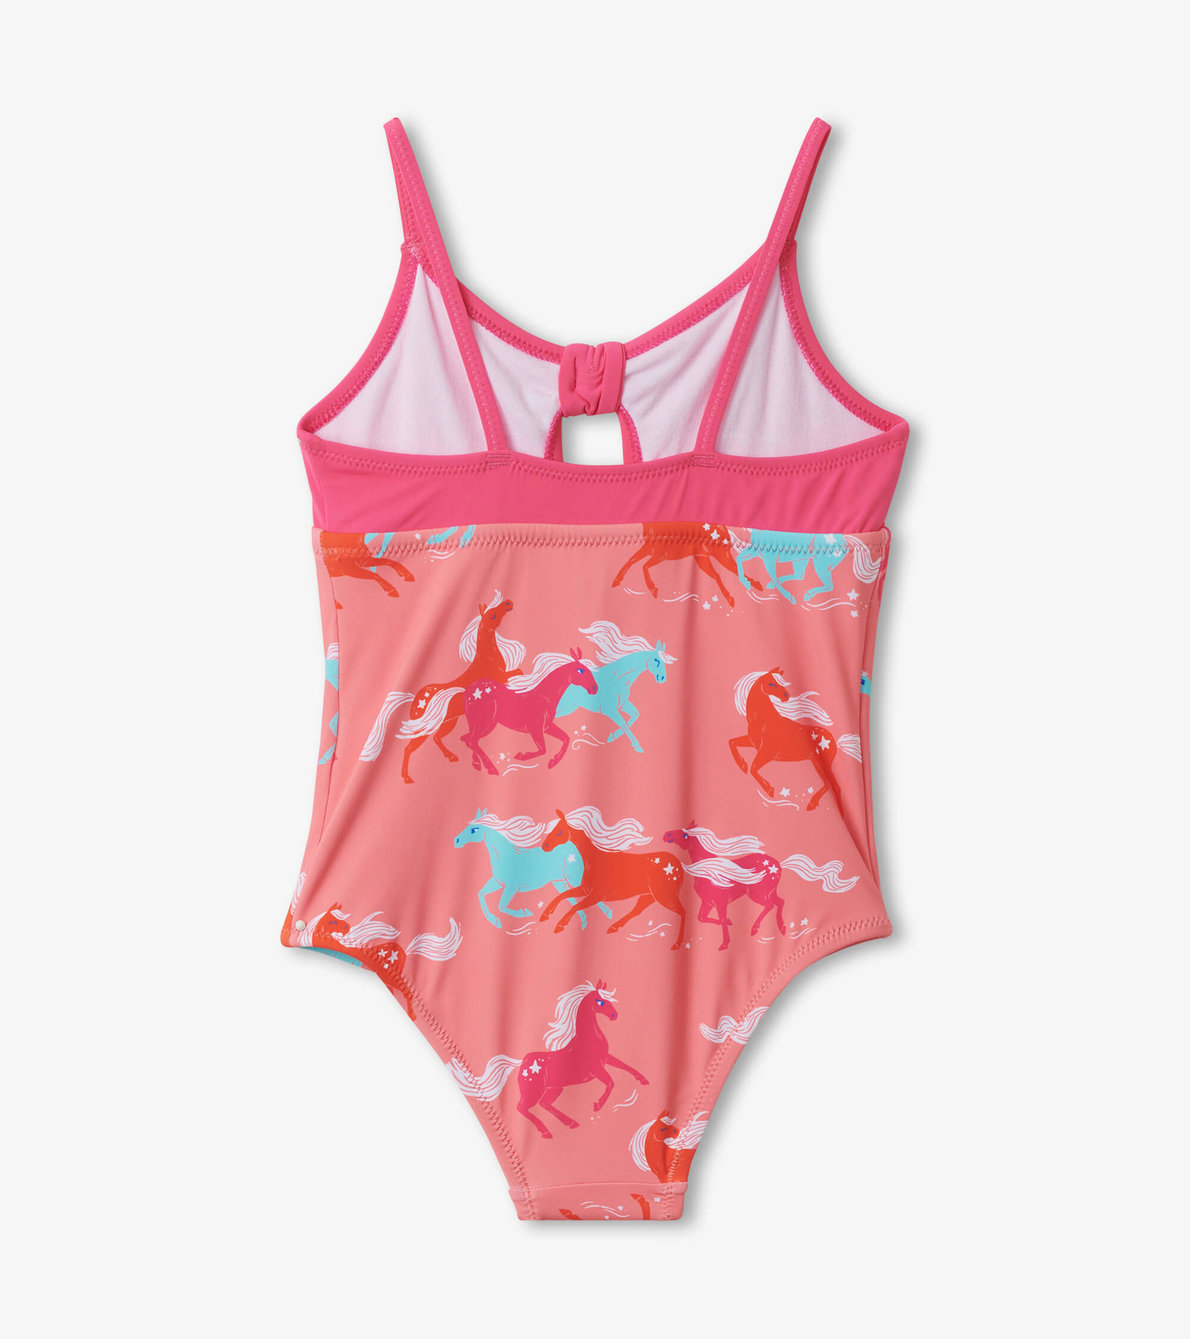 View larger image of Playful Horses Tie Front Swimsuit